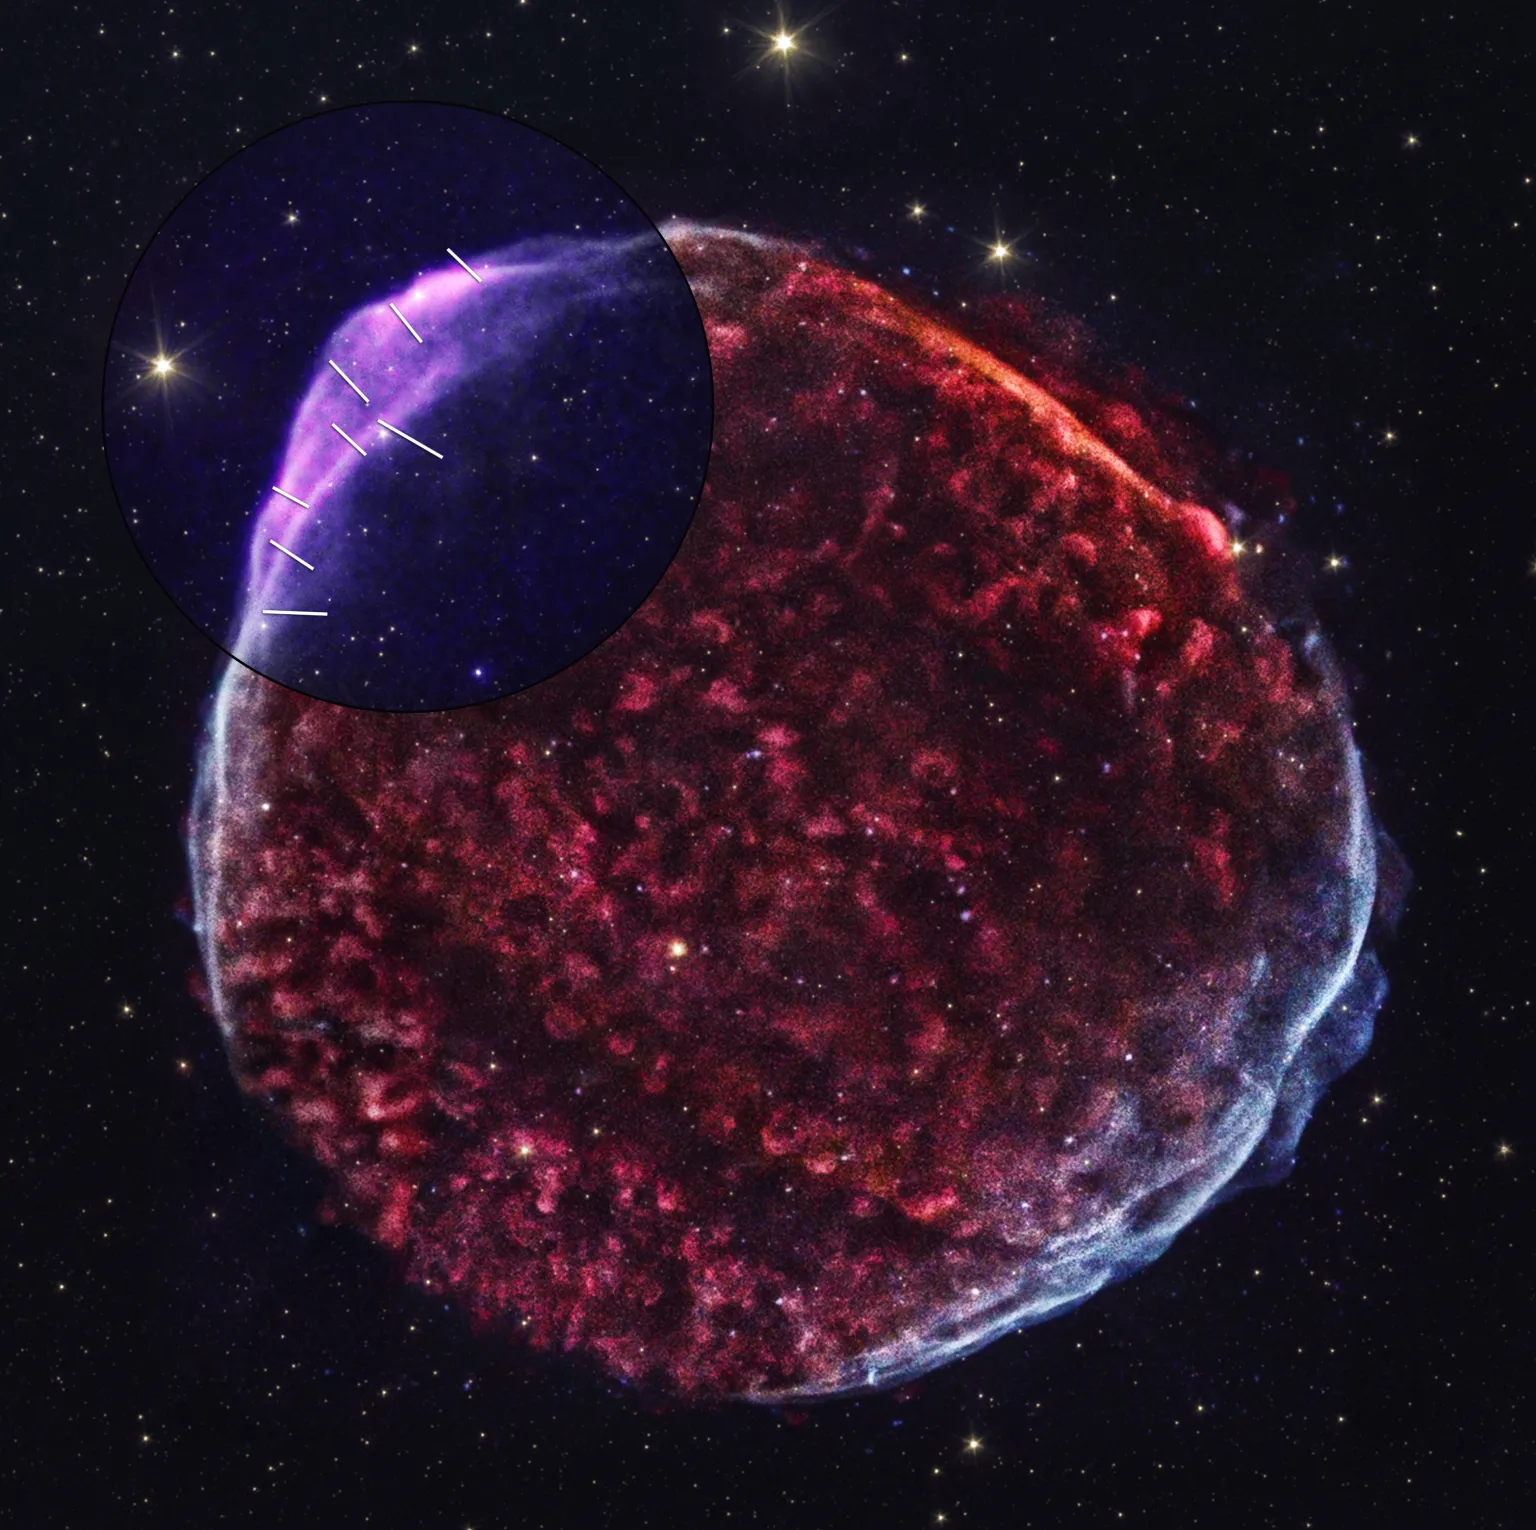 NASA telescope maps supernova remnant’s turbulent magnetic fields for first time